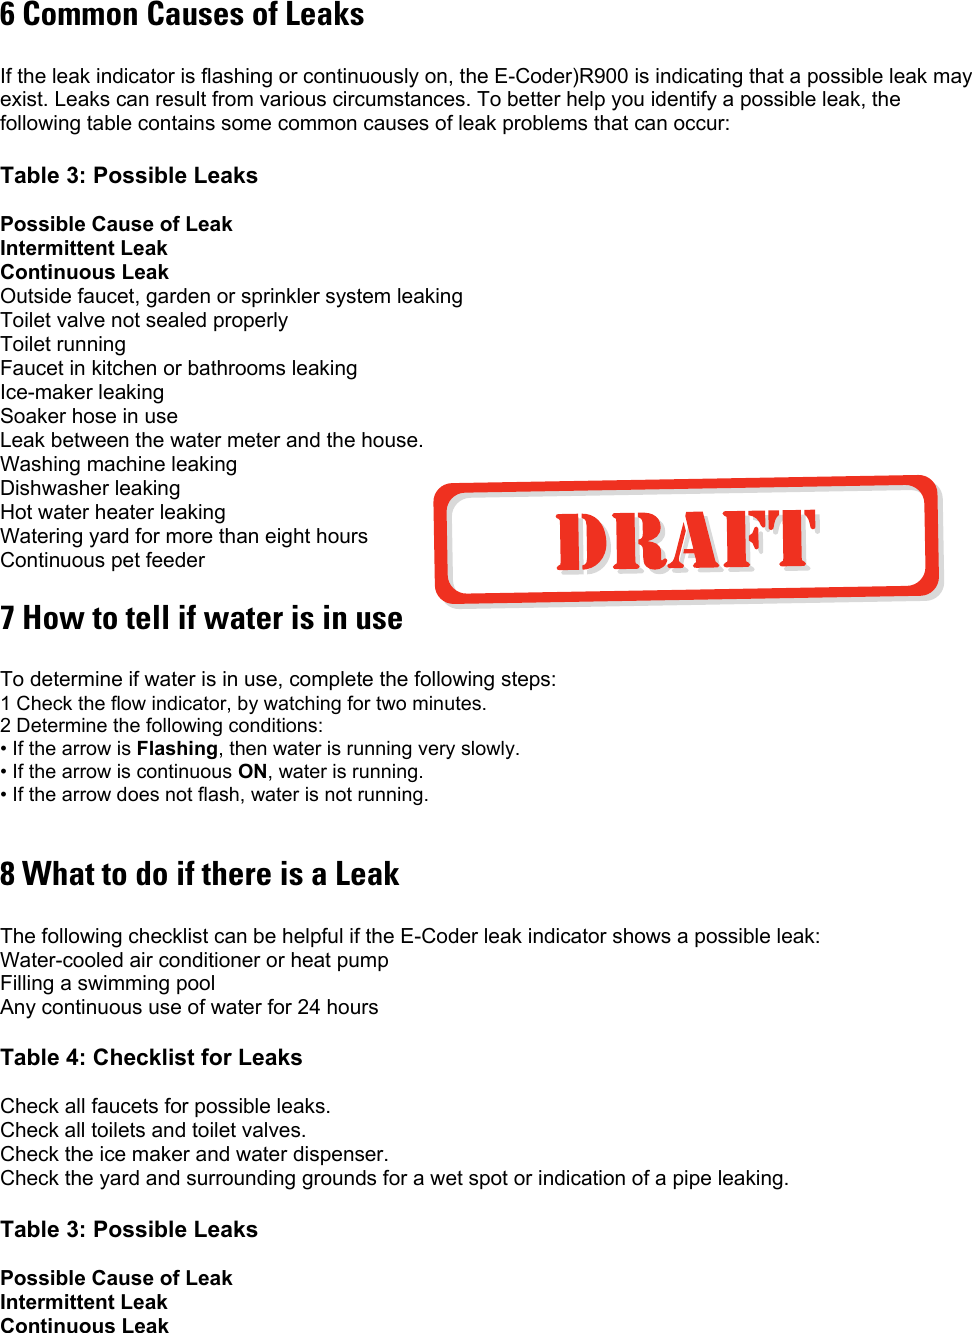 6 Common Causes of Leaks  If the leak indicator is flashing or continuously on, the E-Coder)R900 is indicating that a possible leak may exist. Leaks can result from various circumstances. To better help you identify a possible leak, the following table contains some common causes of leak problems that can occur:  Table 3: Possible Leaks  Possible Cause of Leak  Intermittent Leak  Continuous Leak Outside faucet, garden or sprinkler system leaking Toilet valve not sealed properly Toilet running Faucet in kitchen or bathrooms leaking Ice-maker leaking Soaker hose in use Leak between the water meter and the house. Washing machine leaking Dishwasher leaking Hot water heater leaking Watering yard for more than eight hours Continuous pet feeder 7 How to tell if water is in use  To determine if water is in use, complete the following steps:  1 Check the flow indicator, by watching for two minutes. 2 Determine the following conditions: • If the arrow is Flashing, then water is running very slowly. • If the arrow is continuous ON, water is running. • If the arrow does not flash, water is not running.  8 What to do if there is a Leak  The following checklist can be helpful if the E-Coder leak indicator shows a possible leak: Water-cooled air conditioner or heat pump Filling a swimming pool Any continuous use of water for 24 hours  Table 4: Checklist for Leaks  Check all faucets for possible leaks. Check all toilets and toilet valves. Check the ice maker and water dispenser. Check the yard and surrounding grounds for a wet spot or indication of a pipe leaking.  Table 3: Possible Leaks  Possible Cause of Leak  Intermittent Leak Continuous Leak 